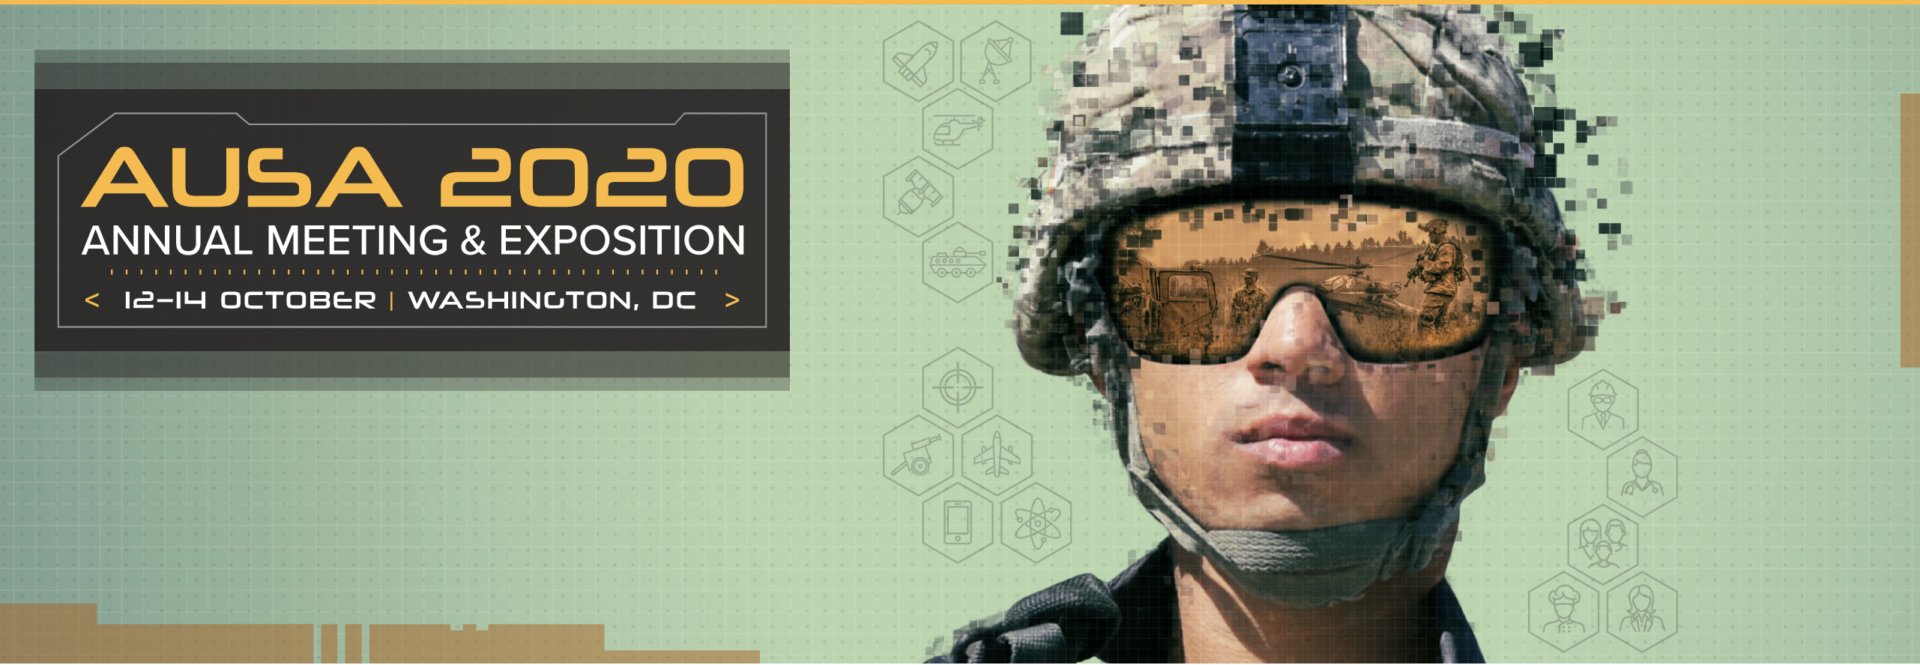 This image features a person in military uniform with a blurred face. The background displays a banner for the AUSA 2020 Annual Meeting & Exposition. The banner is black with white text and a gold border, reading ‘AUSA 2020 Annual Meeting & Exposition | 12-14 October | Washington, DC’. The background also includes a digital pattern of hexagons and other geometric shapes in shades of green and gold.